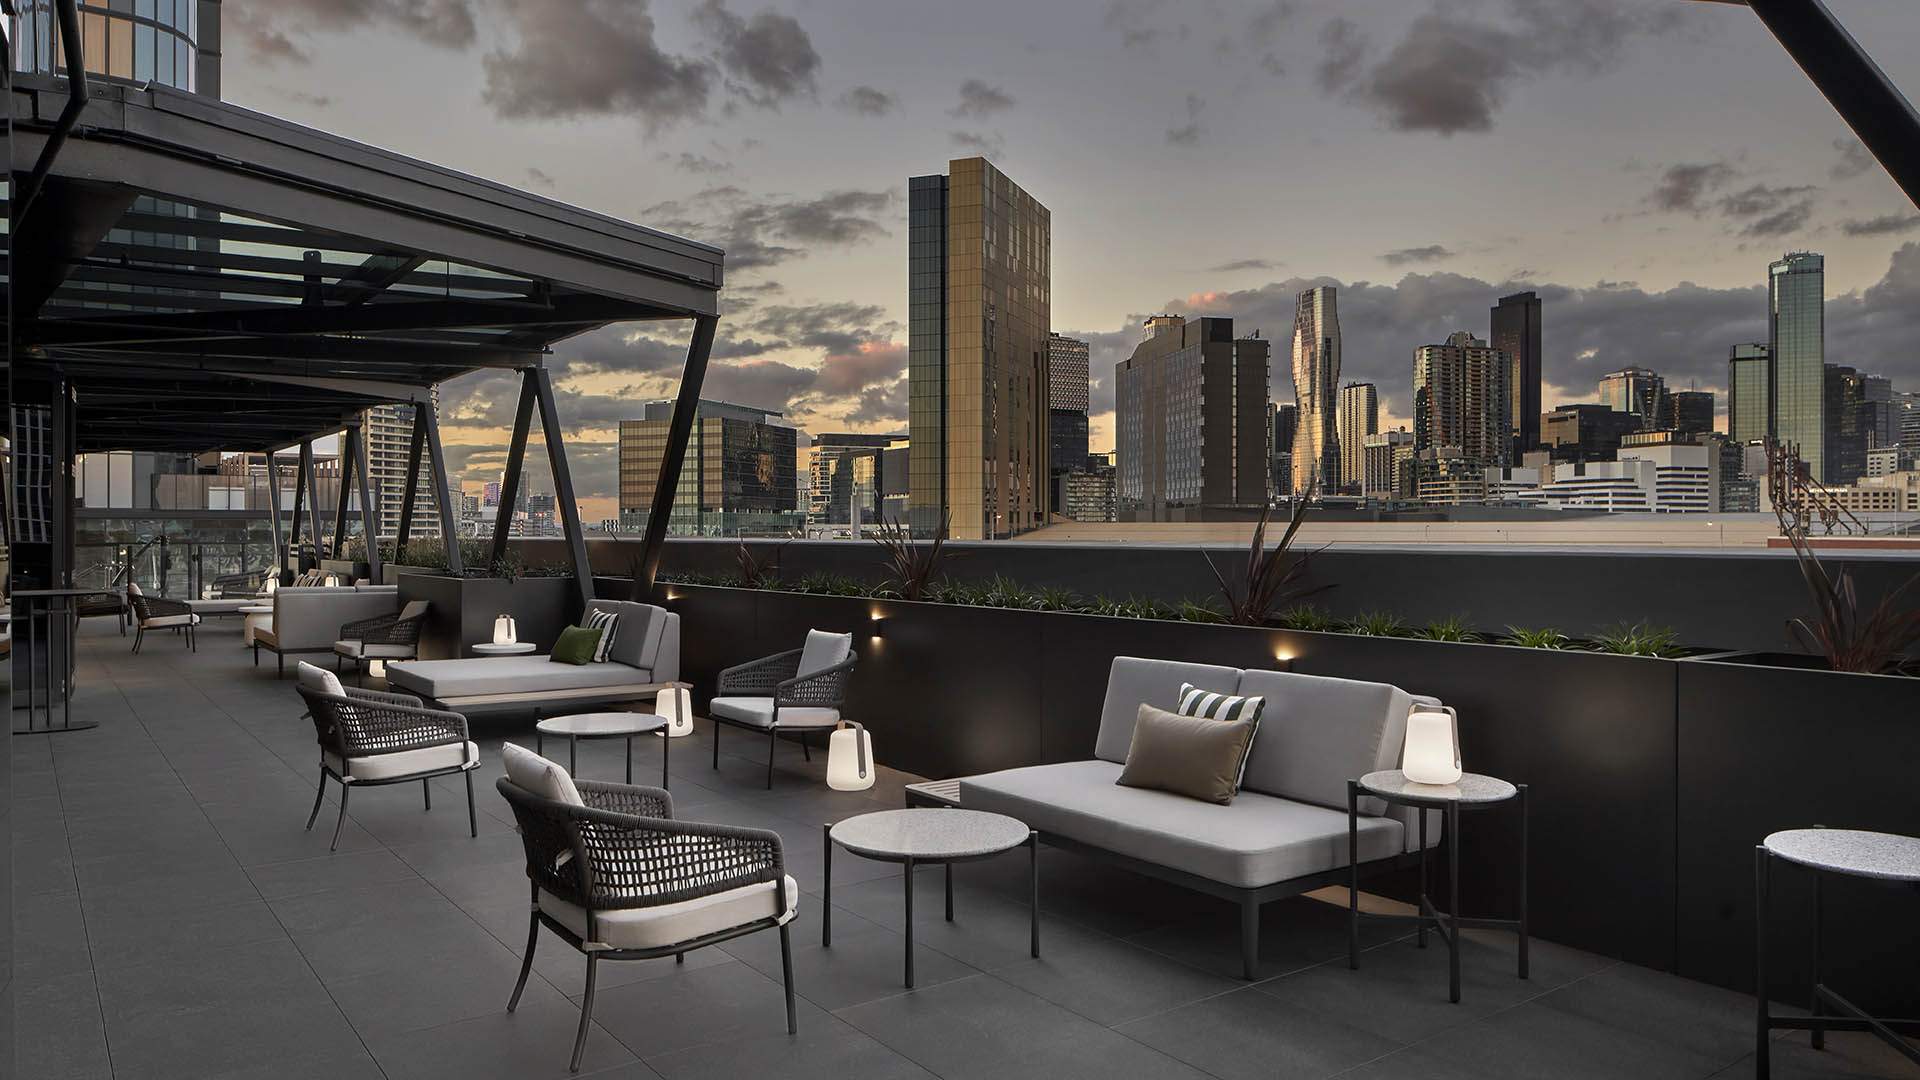 Design-Driven Marriott Chain AC Hotels Has Just Opened Its First Australian Site in Melbourne